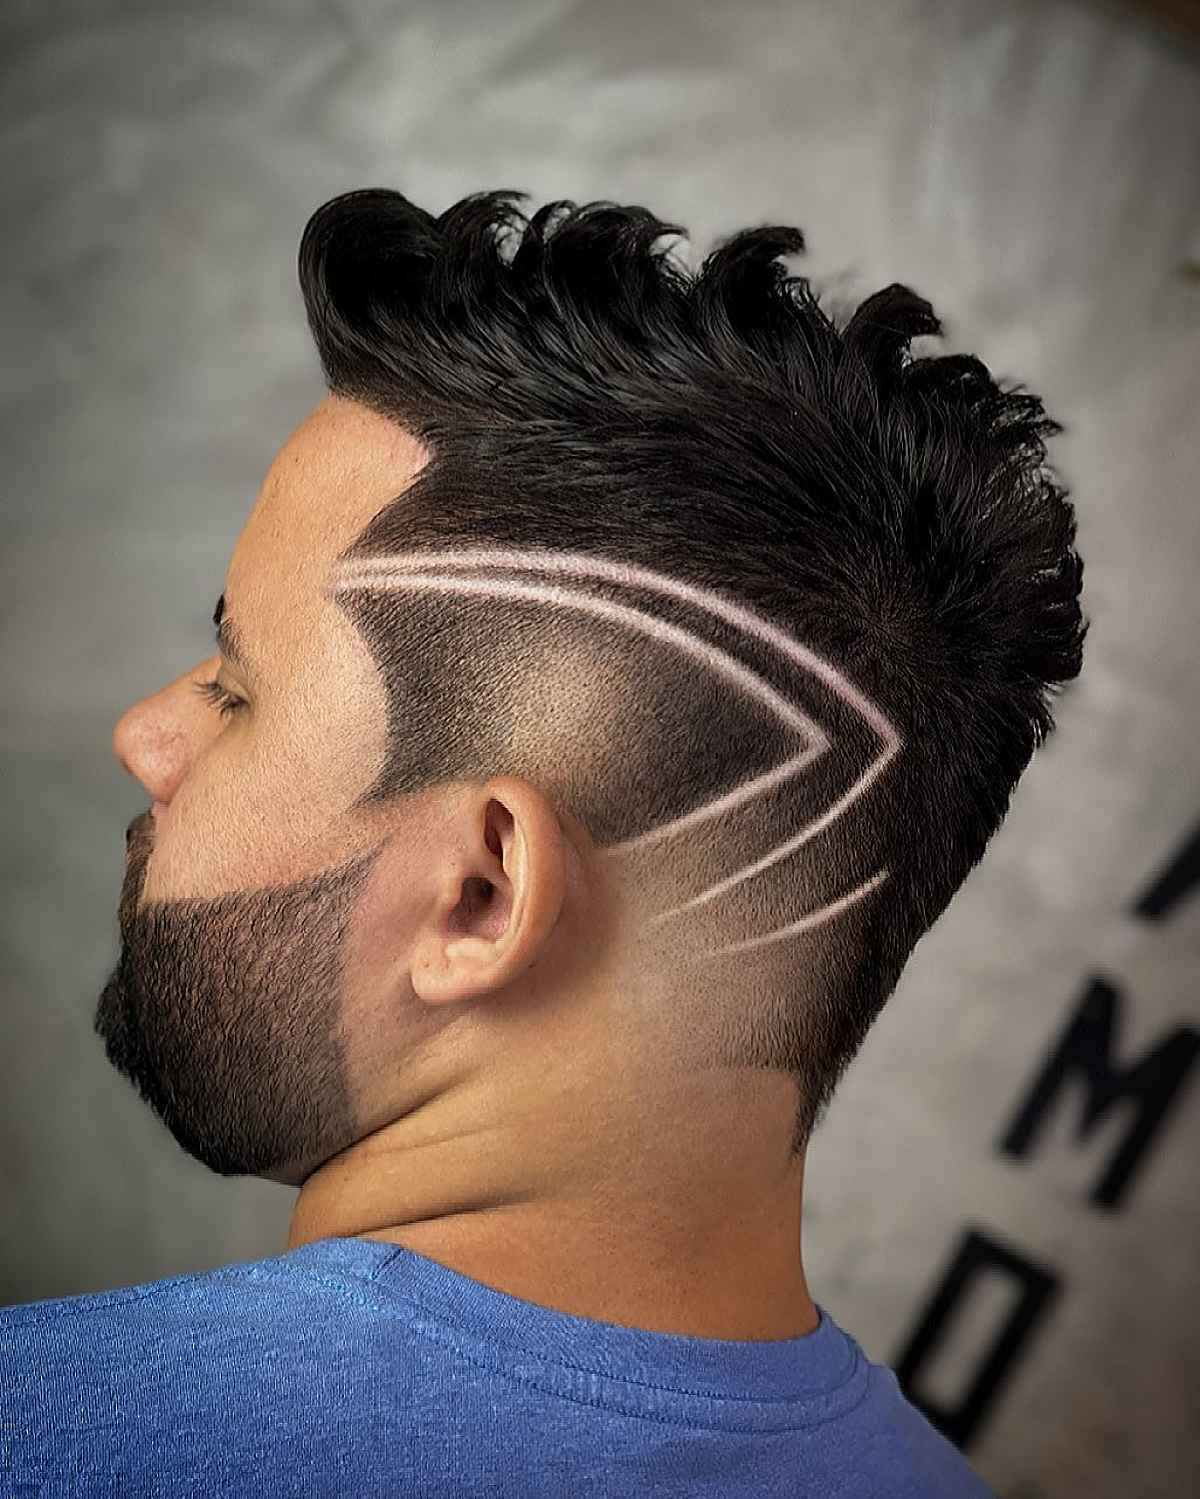 hair design with arches for men